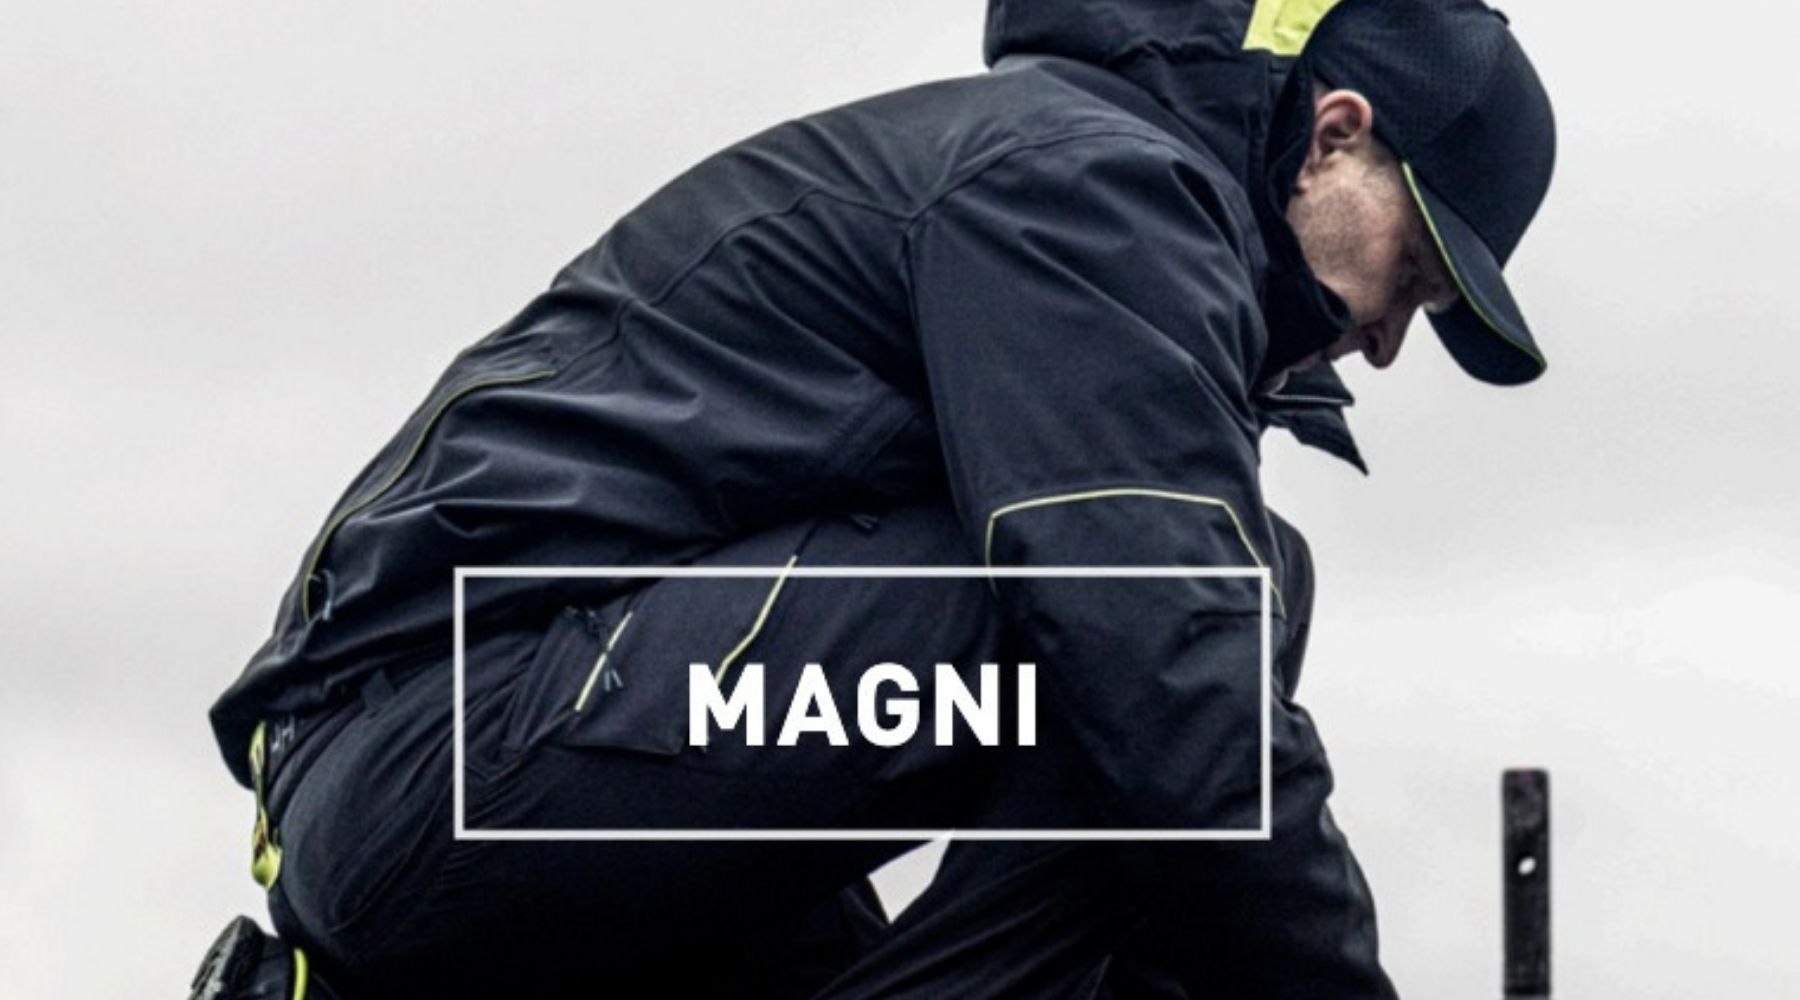 An image of someone wearing Helly Hansen Magni